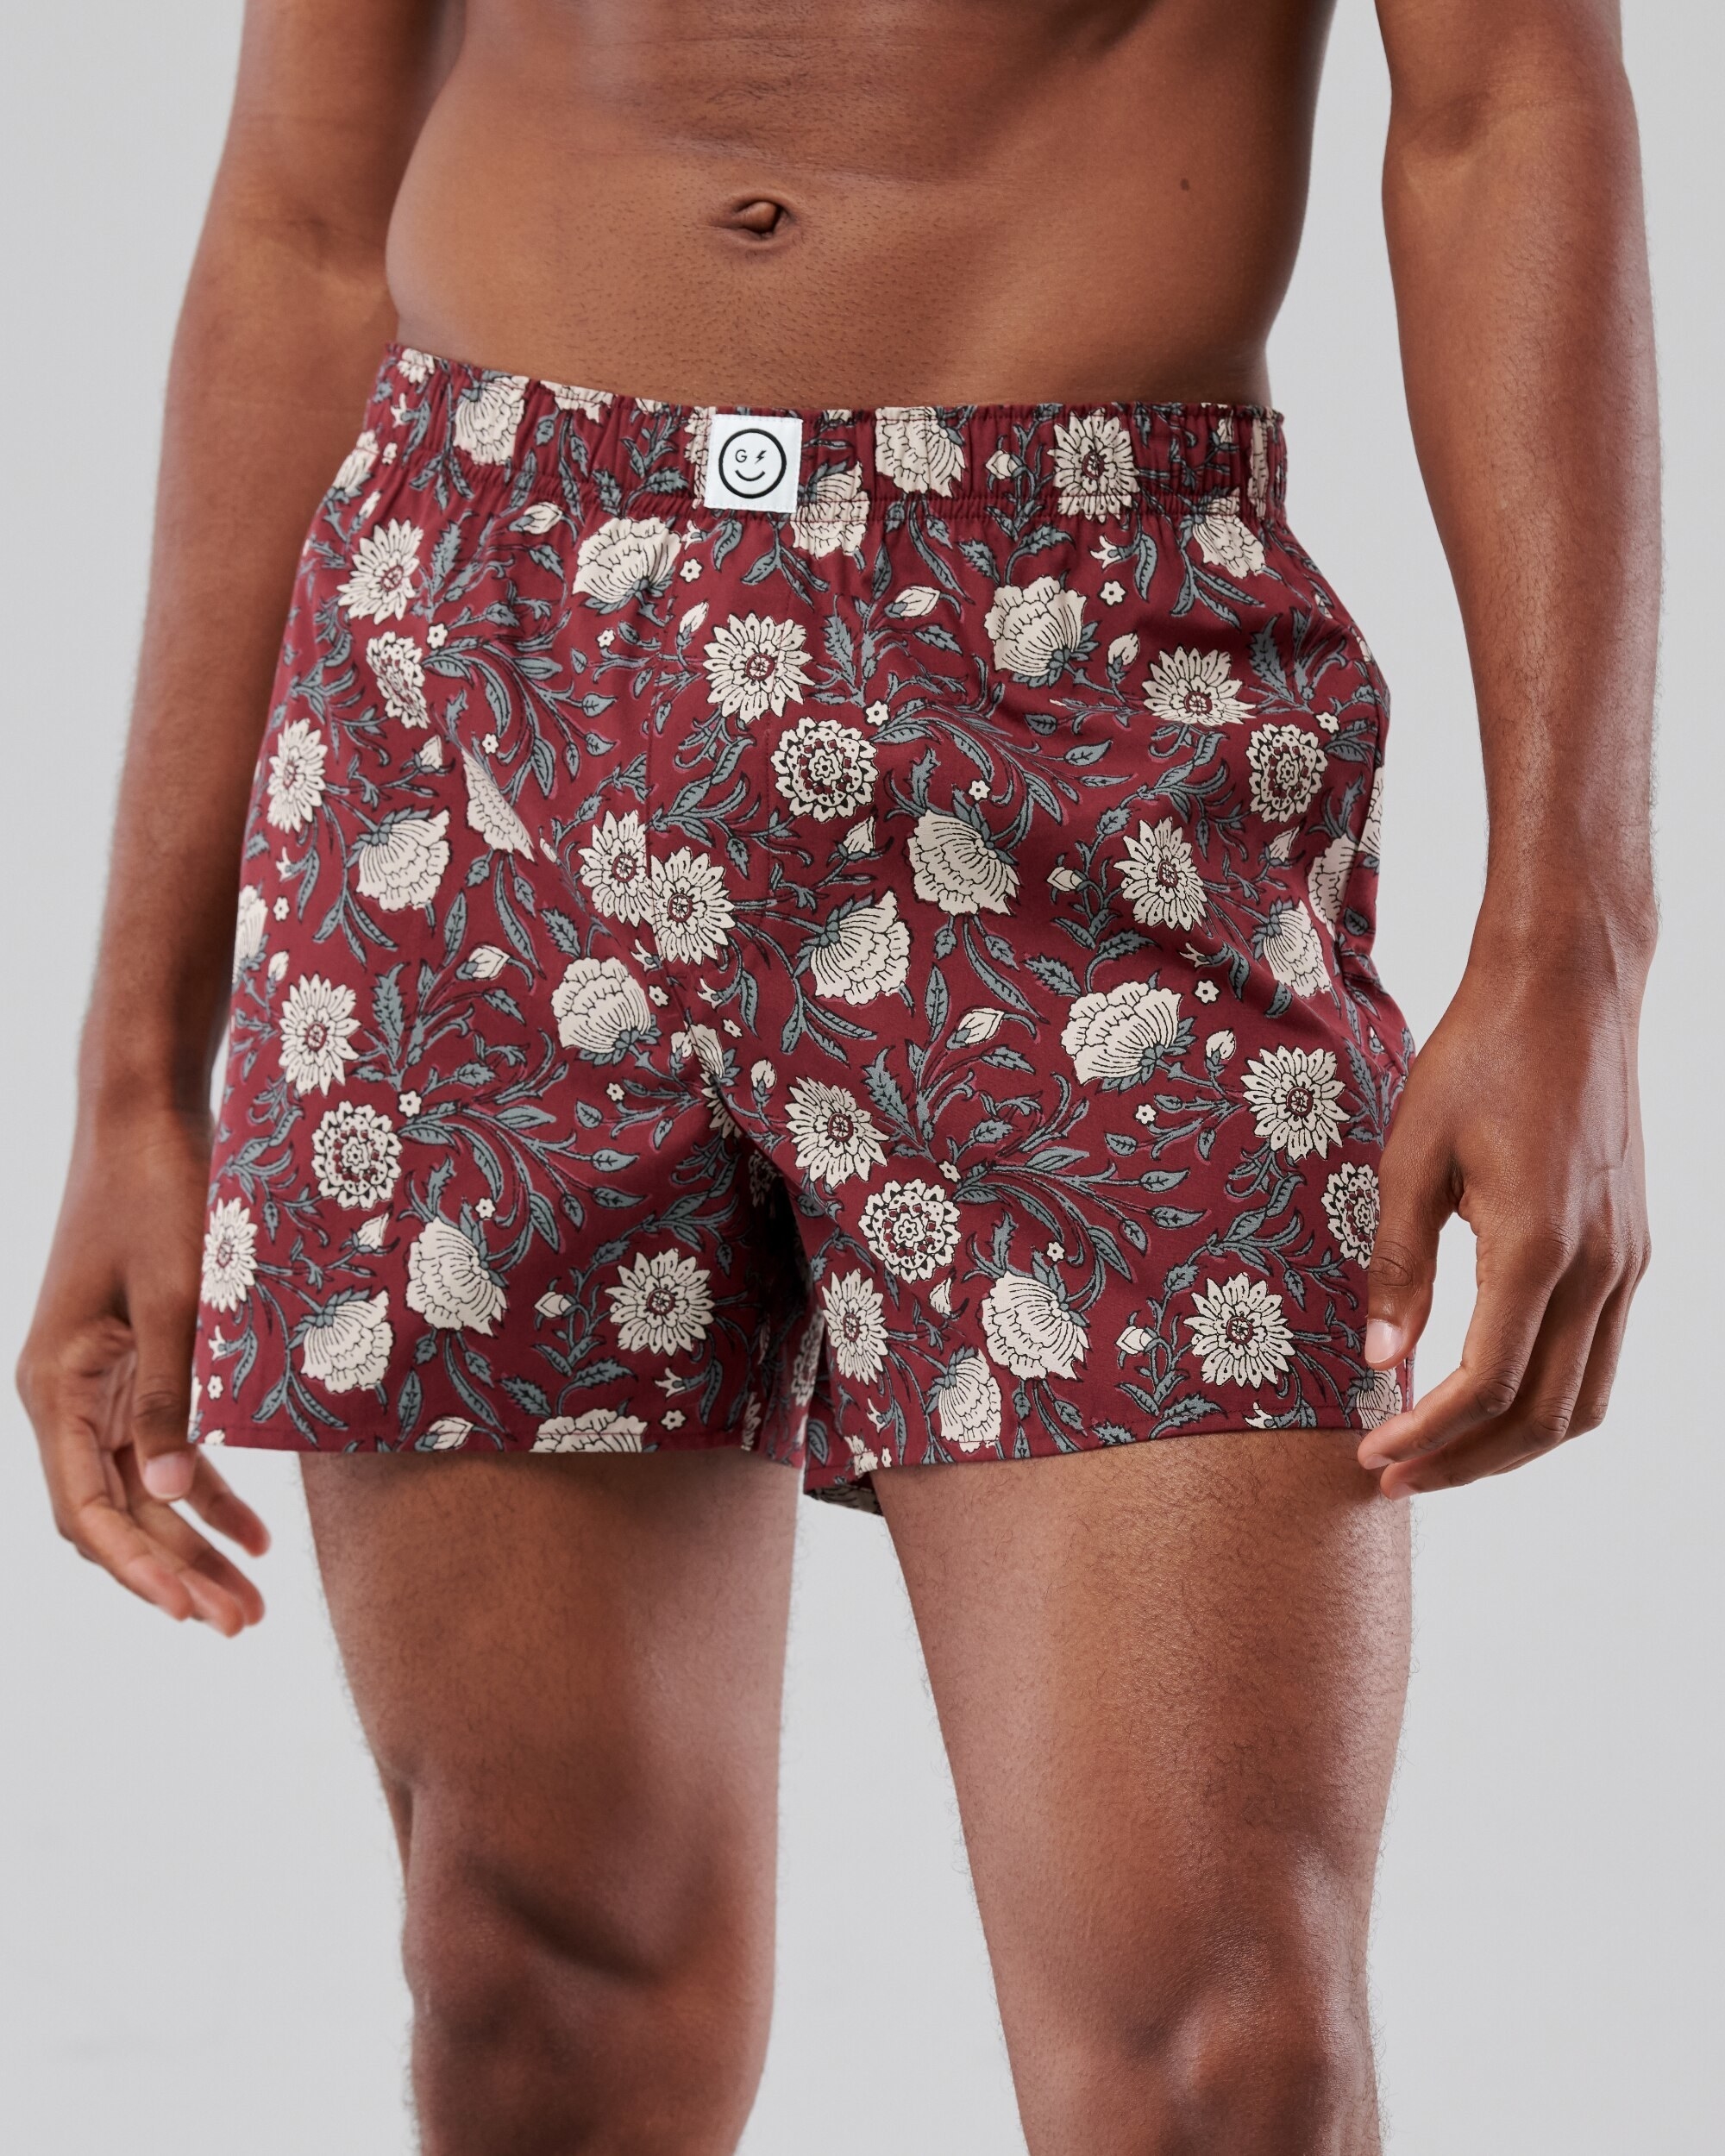 Men's Gilly Hicks Boxer Shorts Underwear By Hollister Blue Floral Size XXL  New